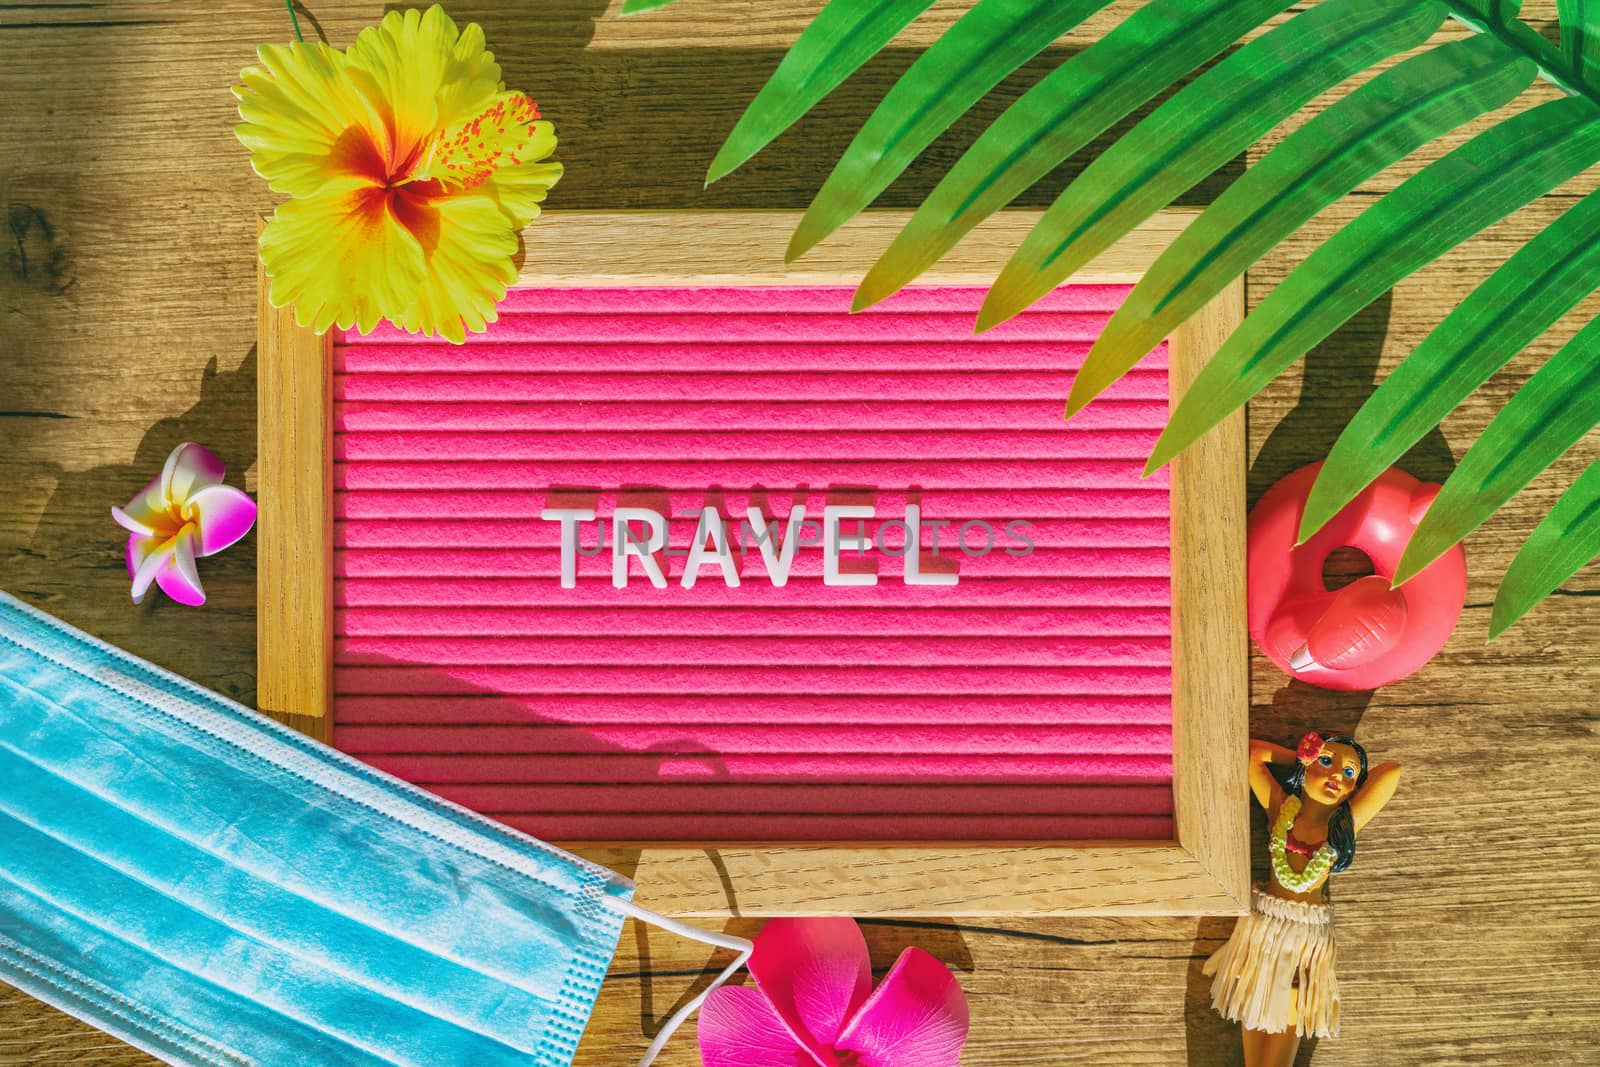 TRAVEL tropical sign with medical face mask for new reality after coronavirus pandemic. Funny pink felt board with text and flowers, hula doll, surgical mandatory wearing.